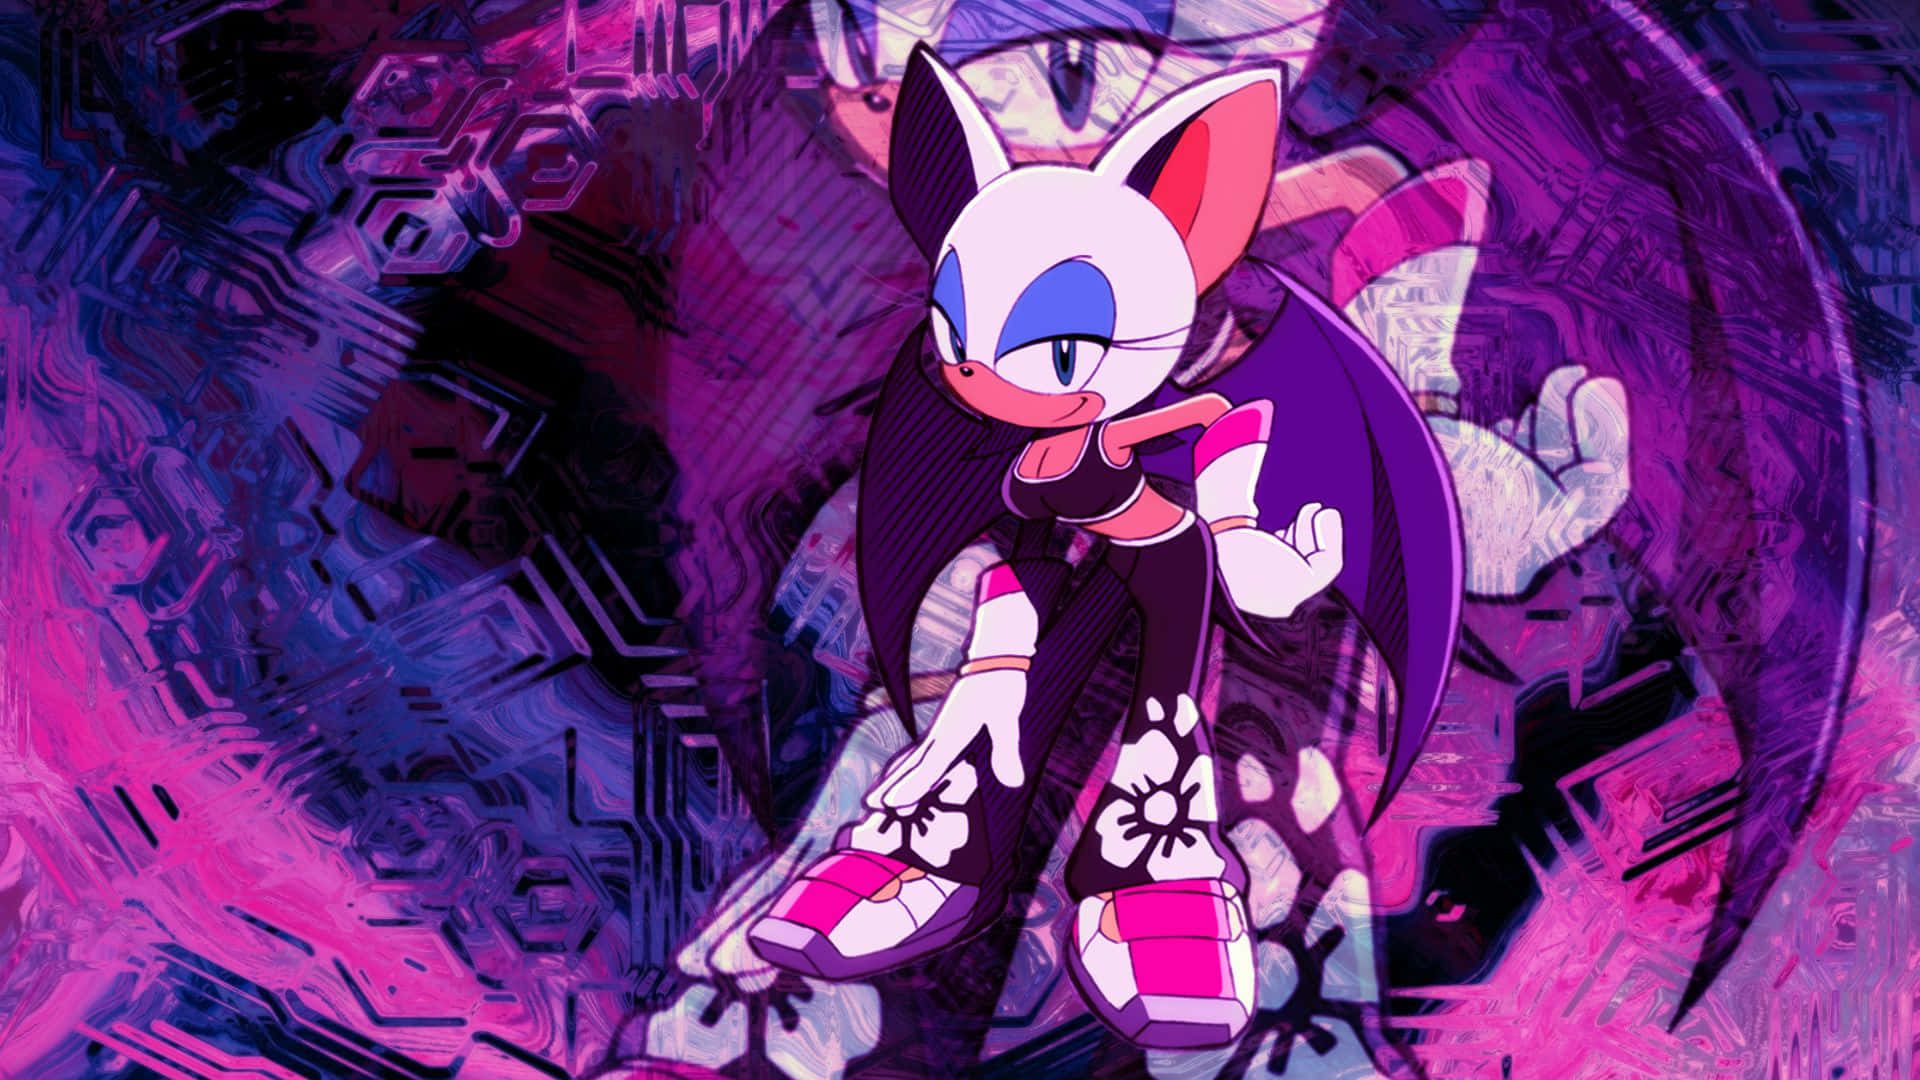 Caption: Rouge The Bat striking a pose in an action-packed scene Wallpaper